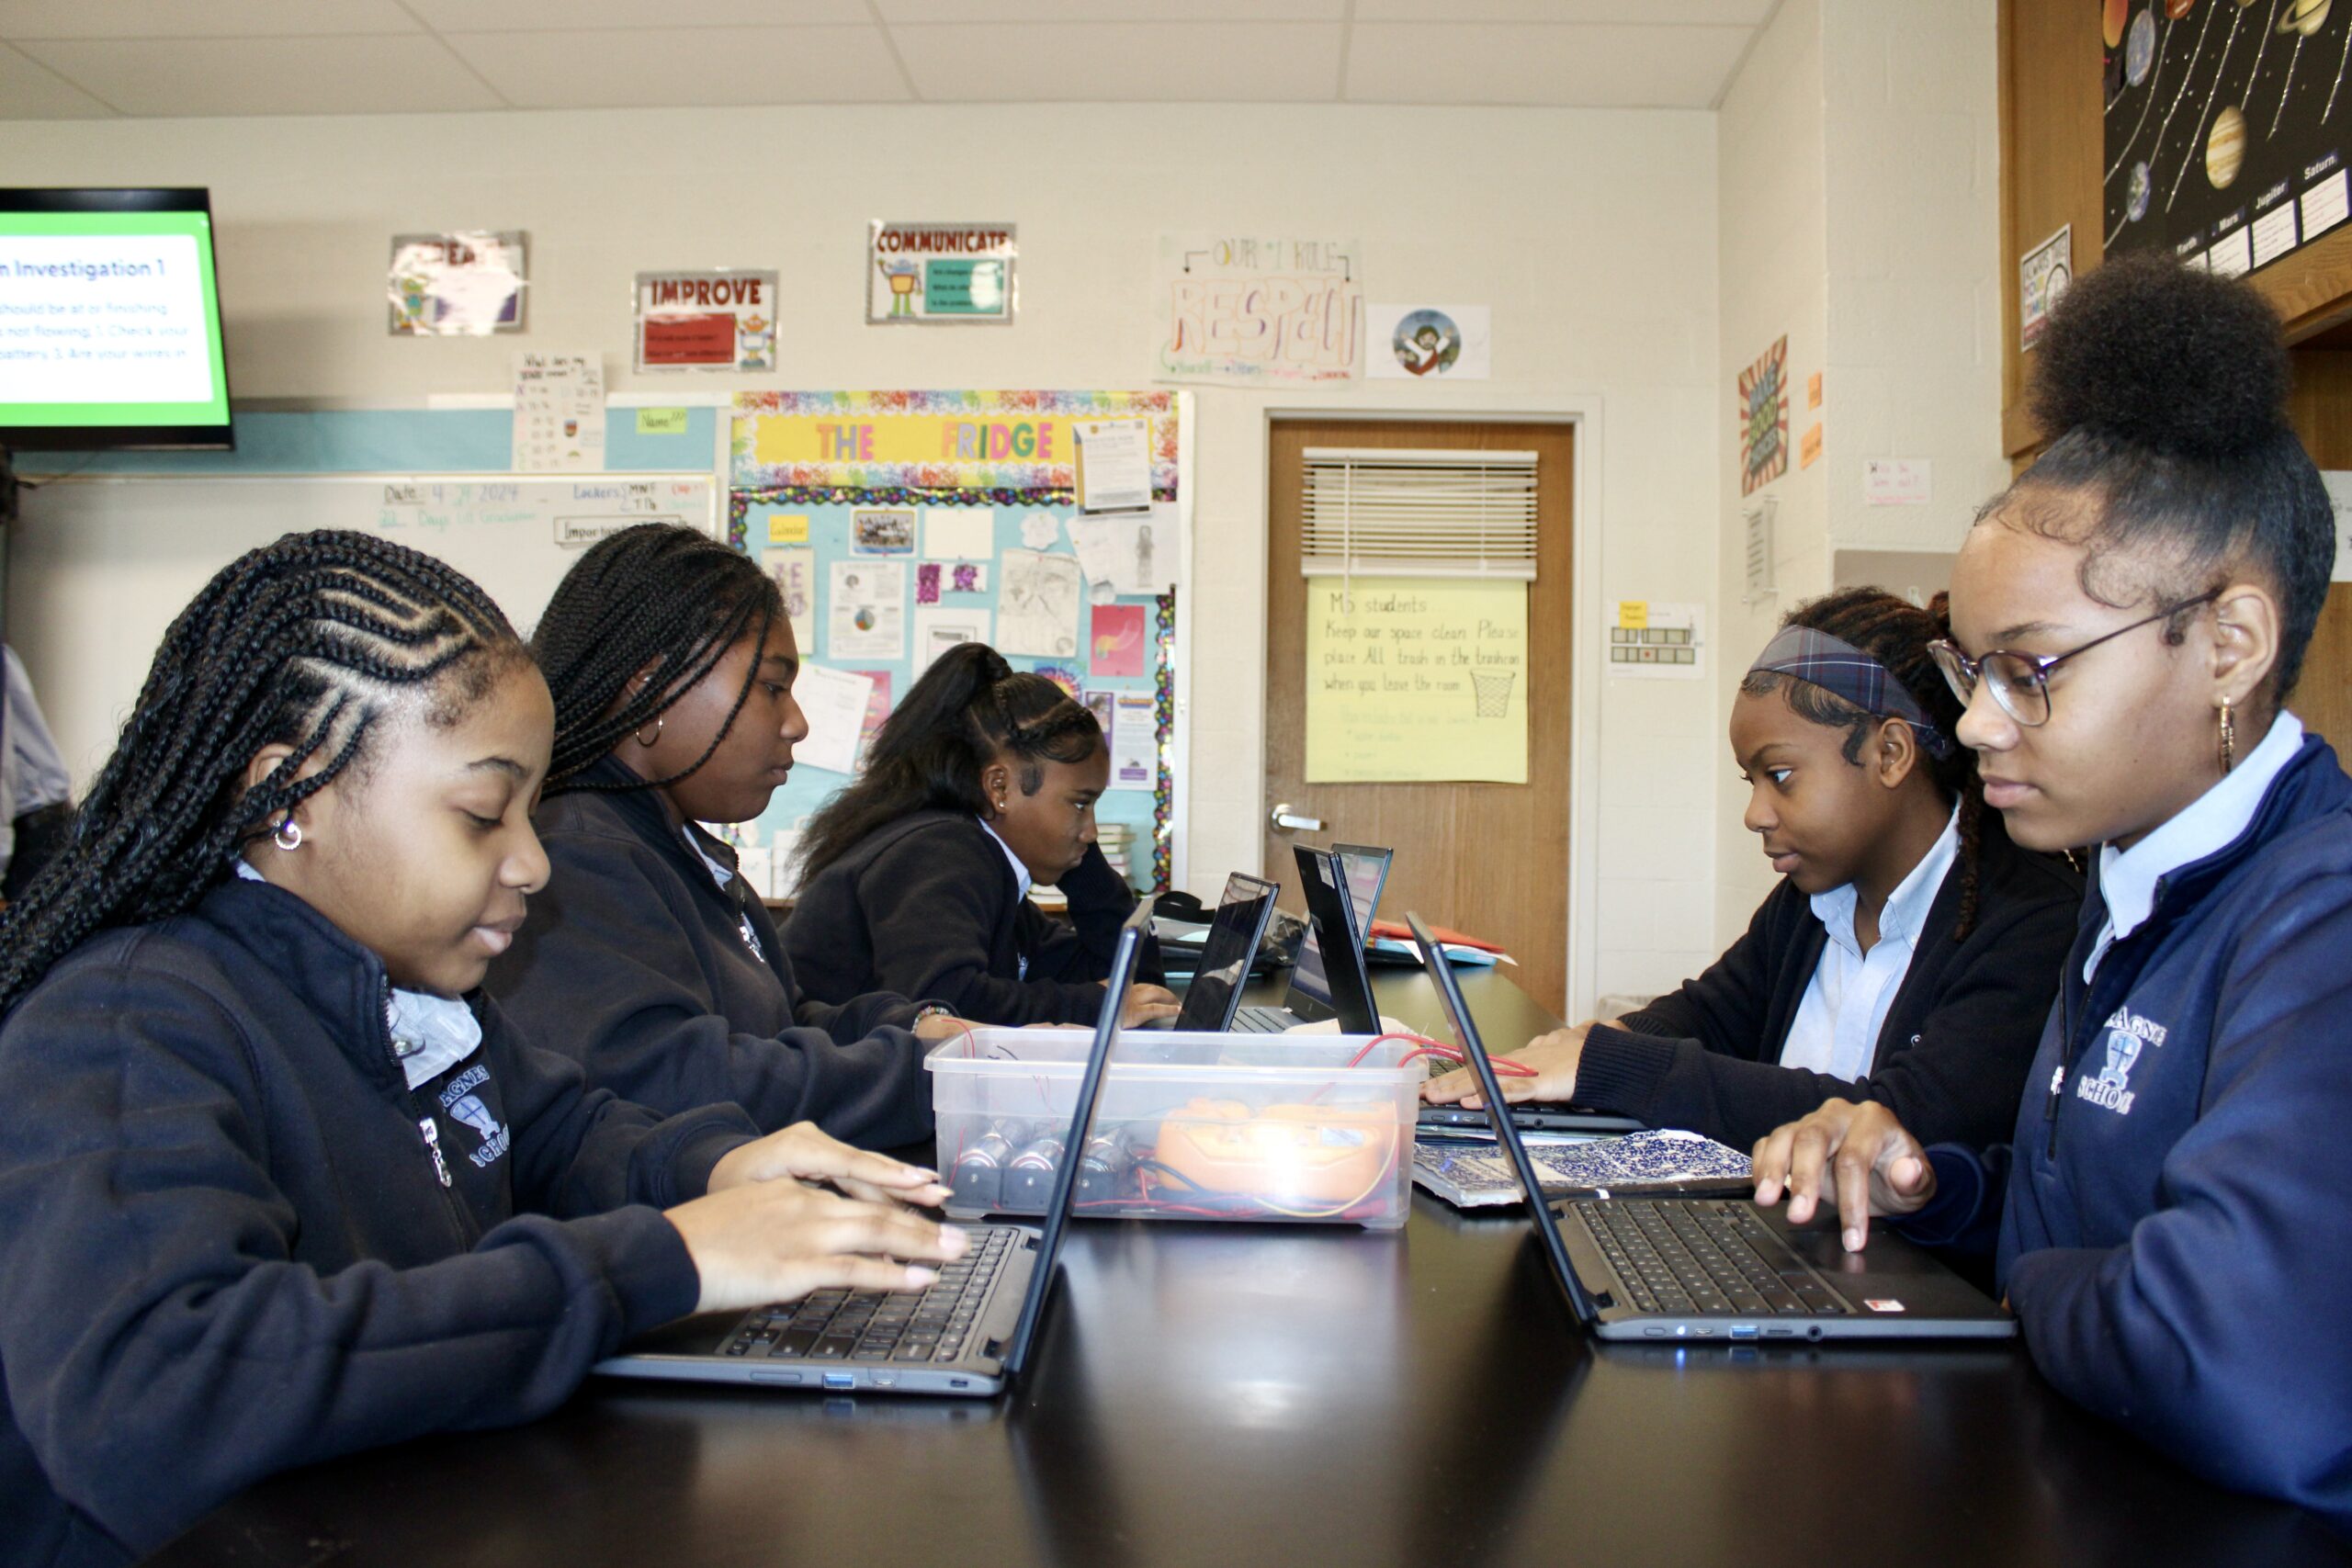 Private Middle School Students at St. Agnes School in Catonsville, MD 